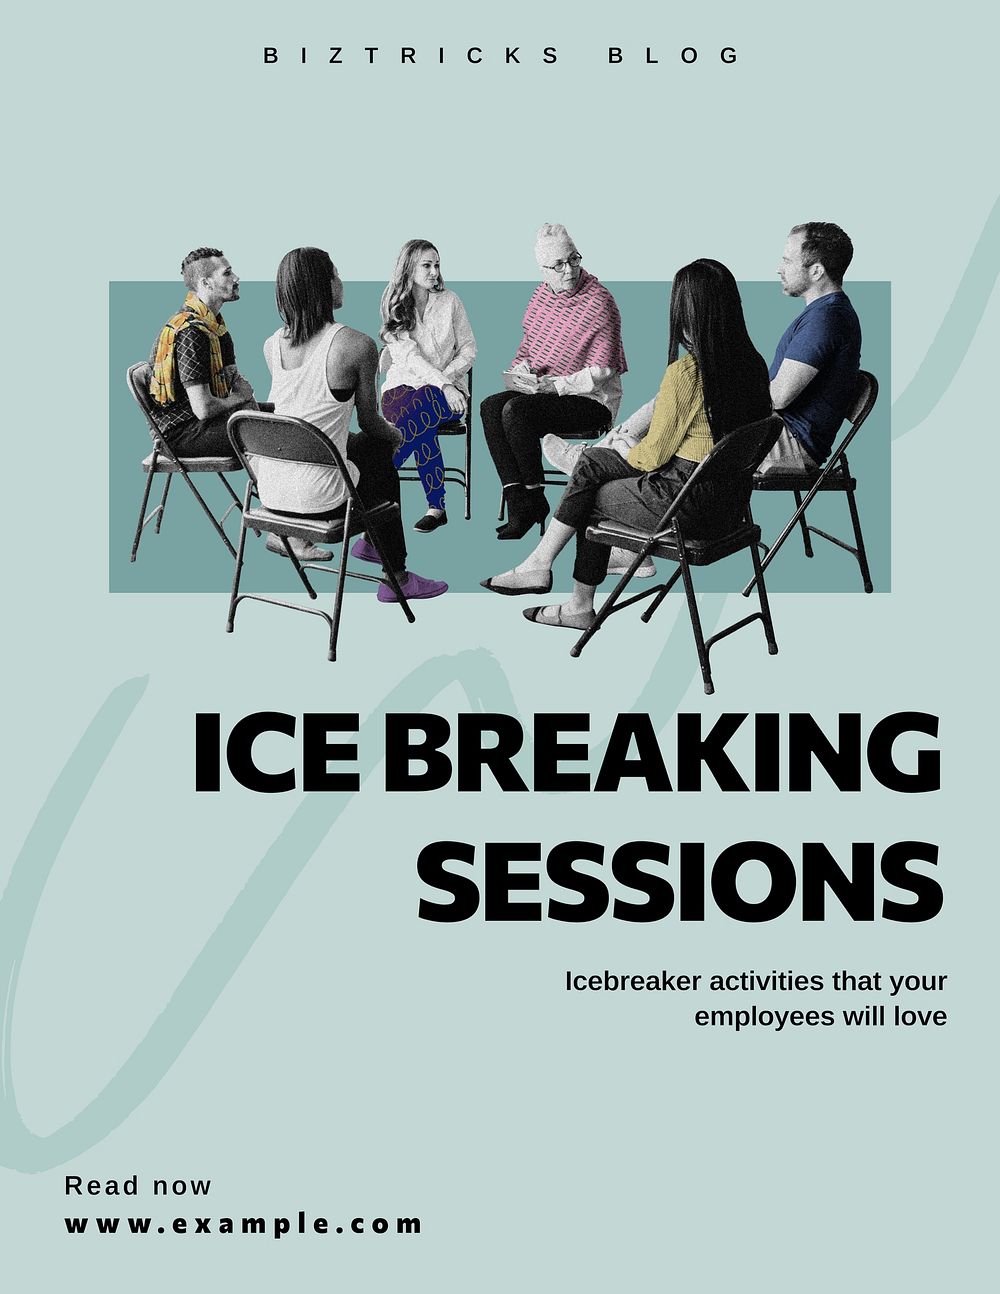 Ice-breaking sessions flyer template, editable collage remix